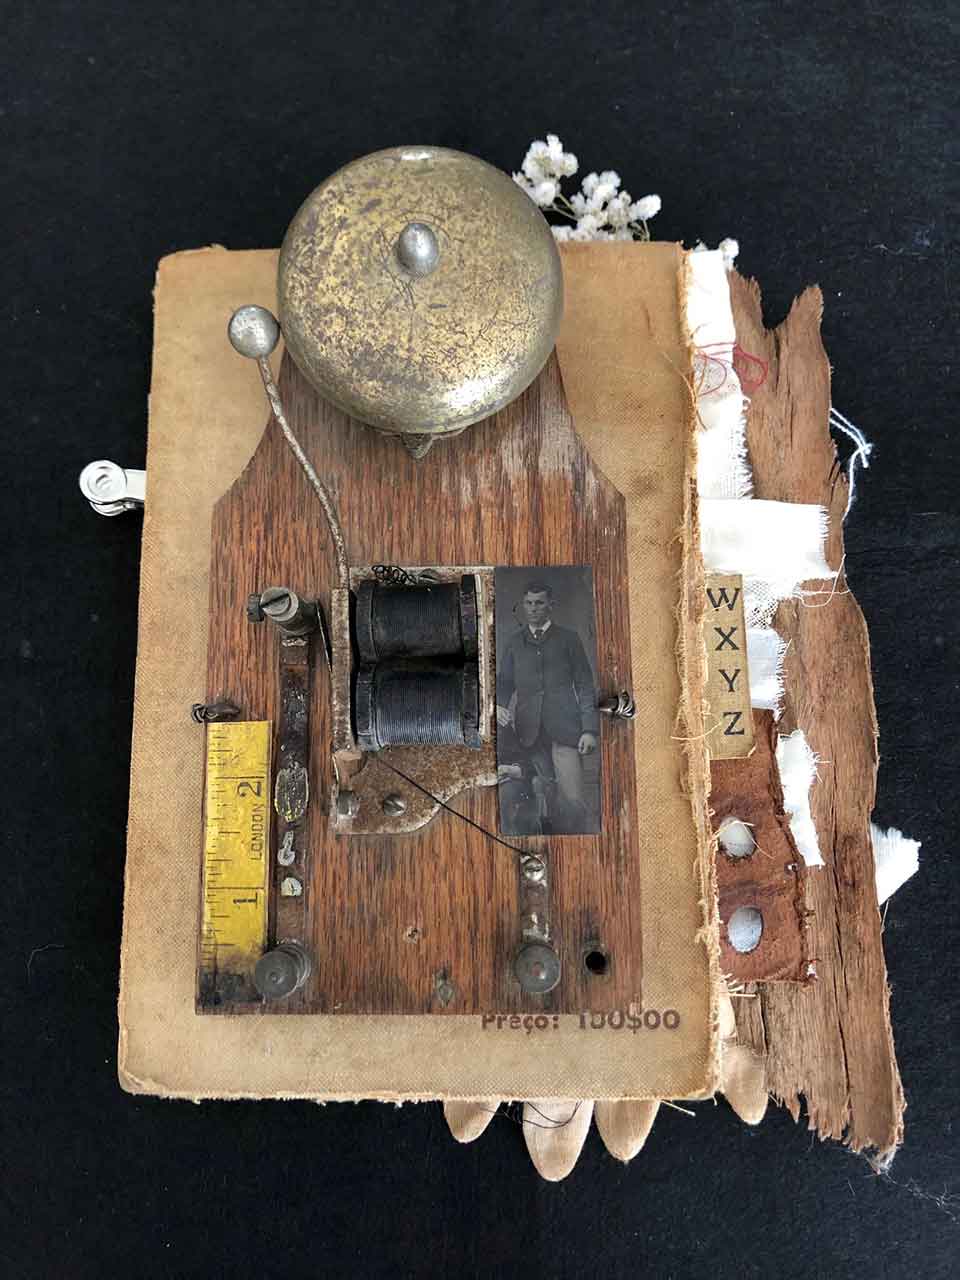 A crude hammered bells and wires mounted on the deconstructed interior of a book